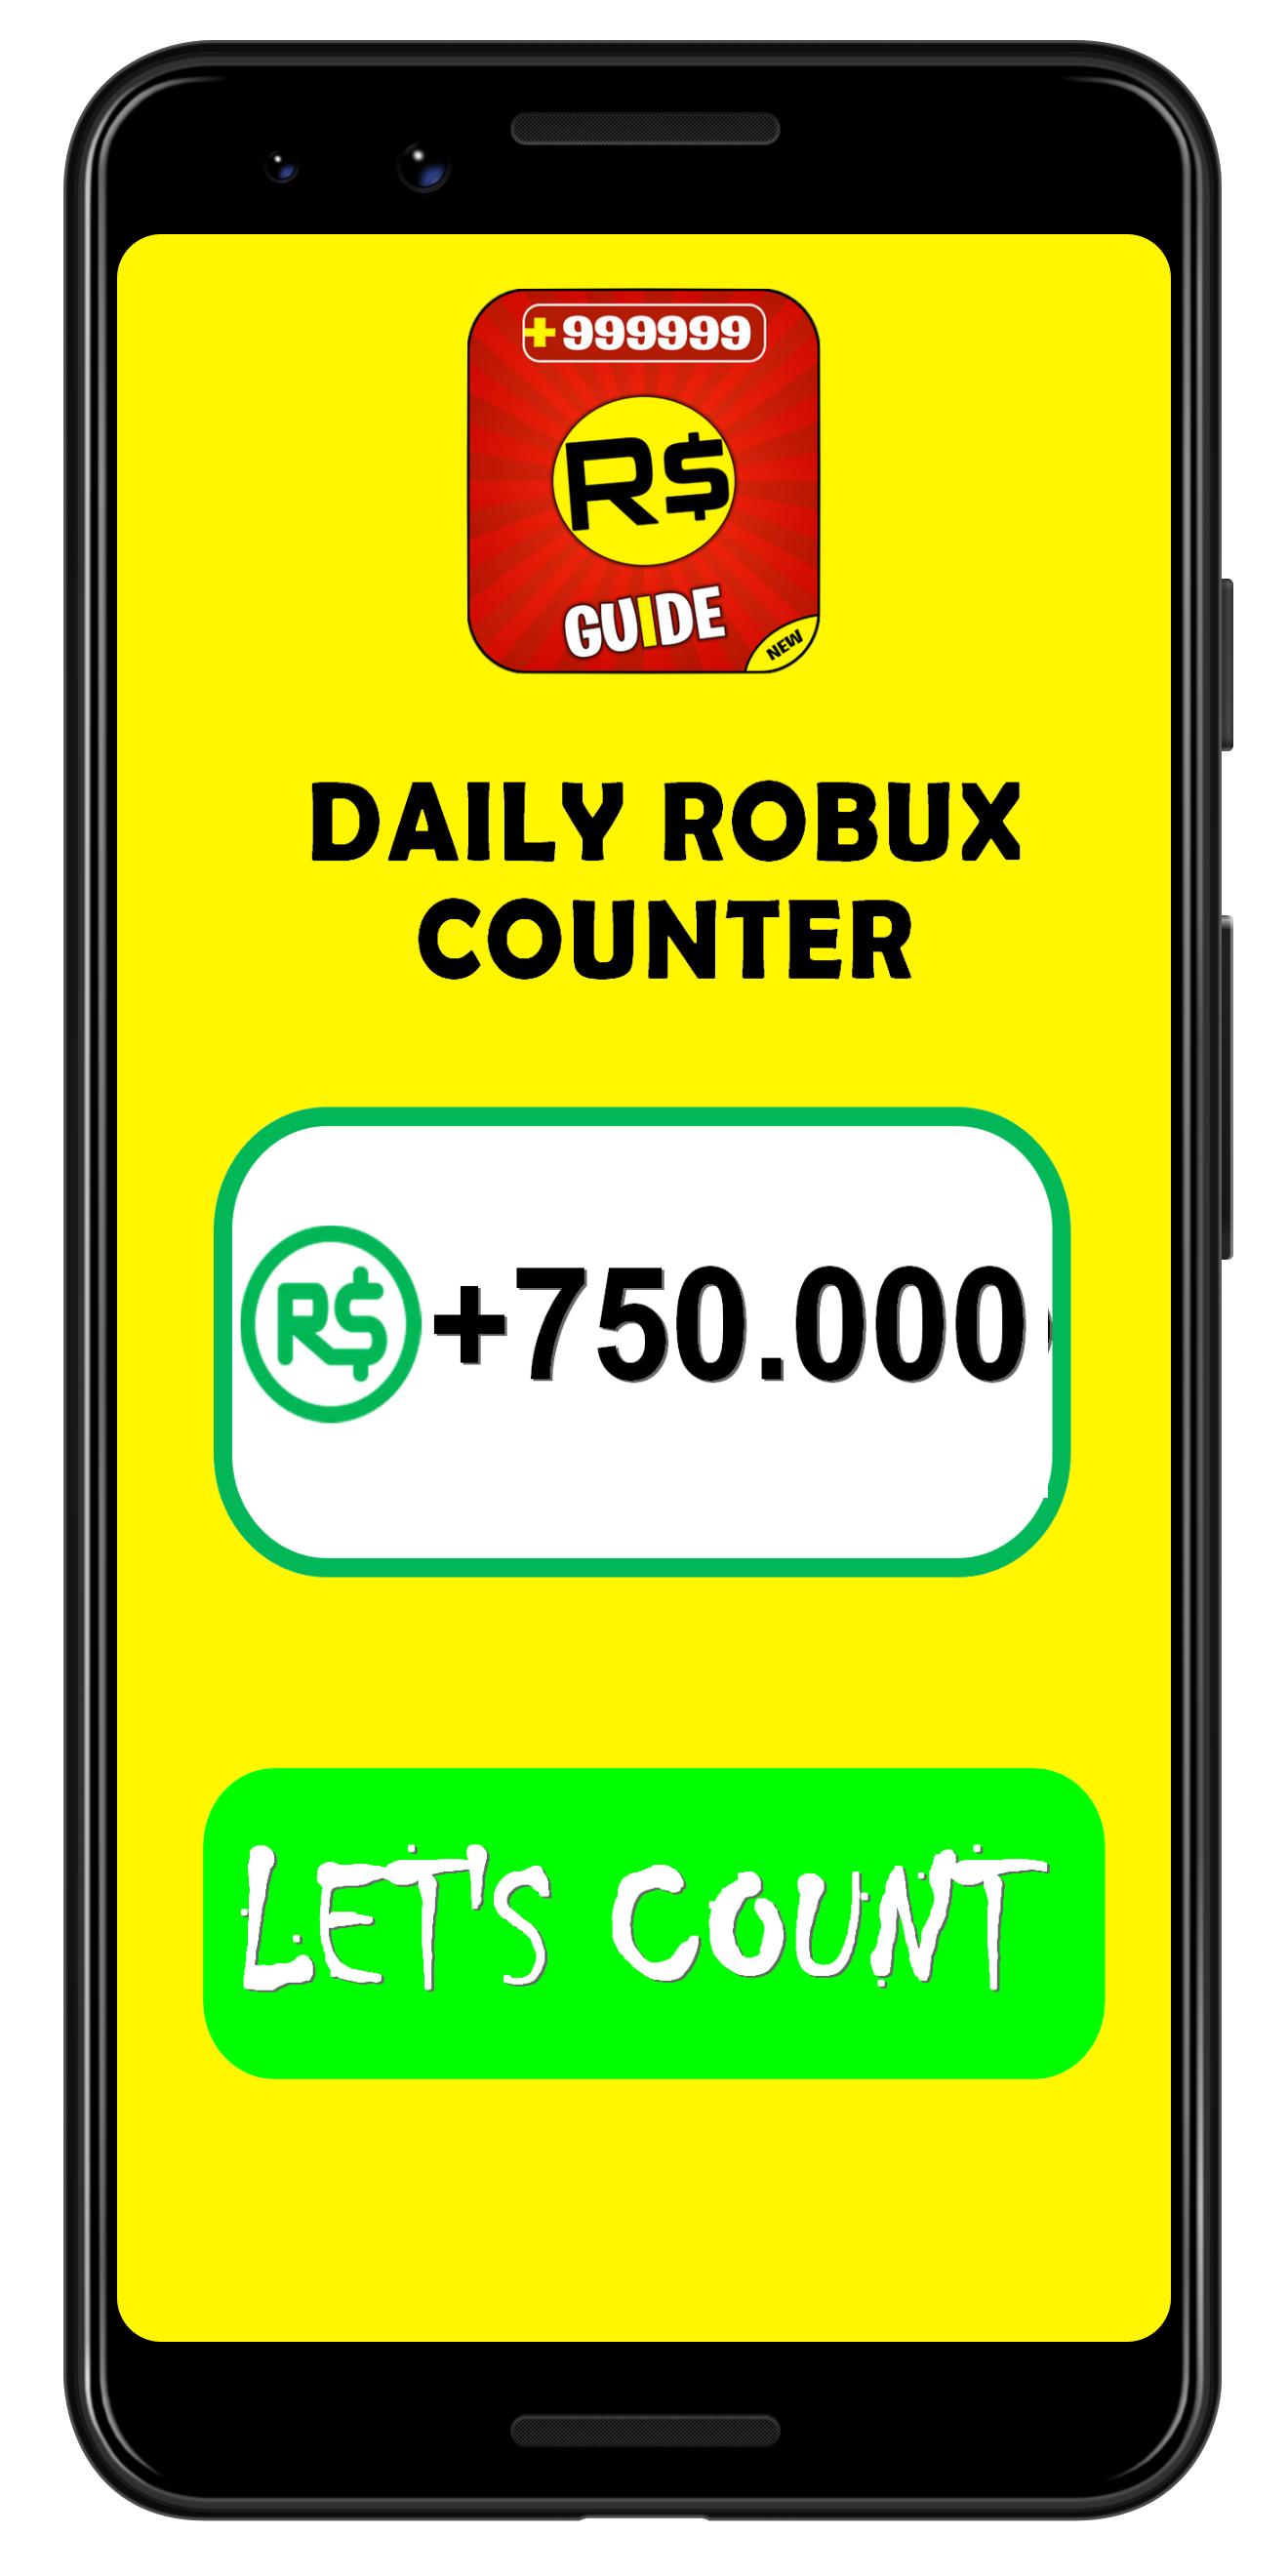 Robux - Free Robux Count with Guide 1.0 Free Download